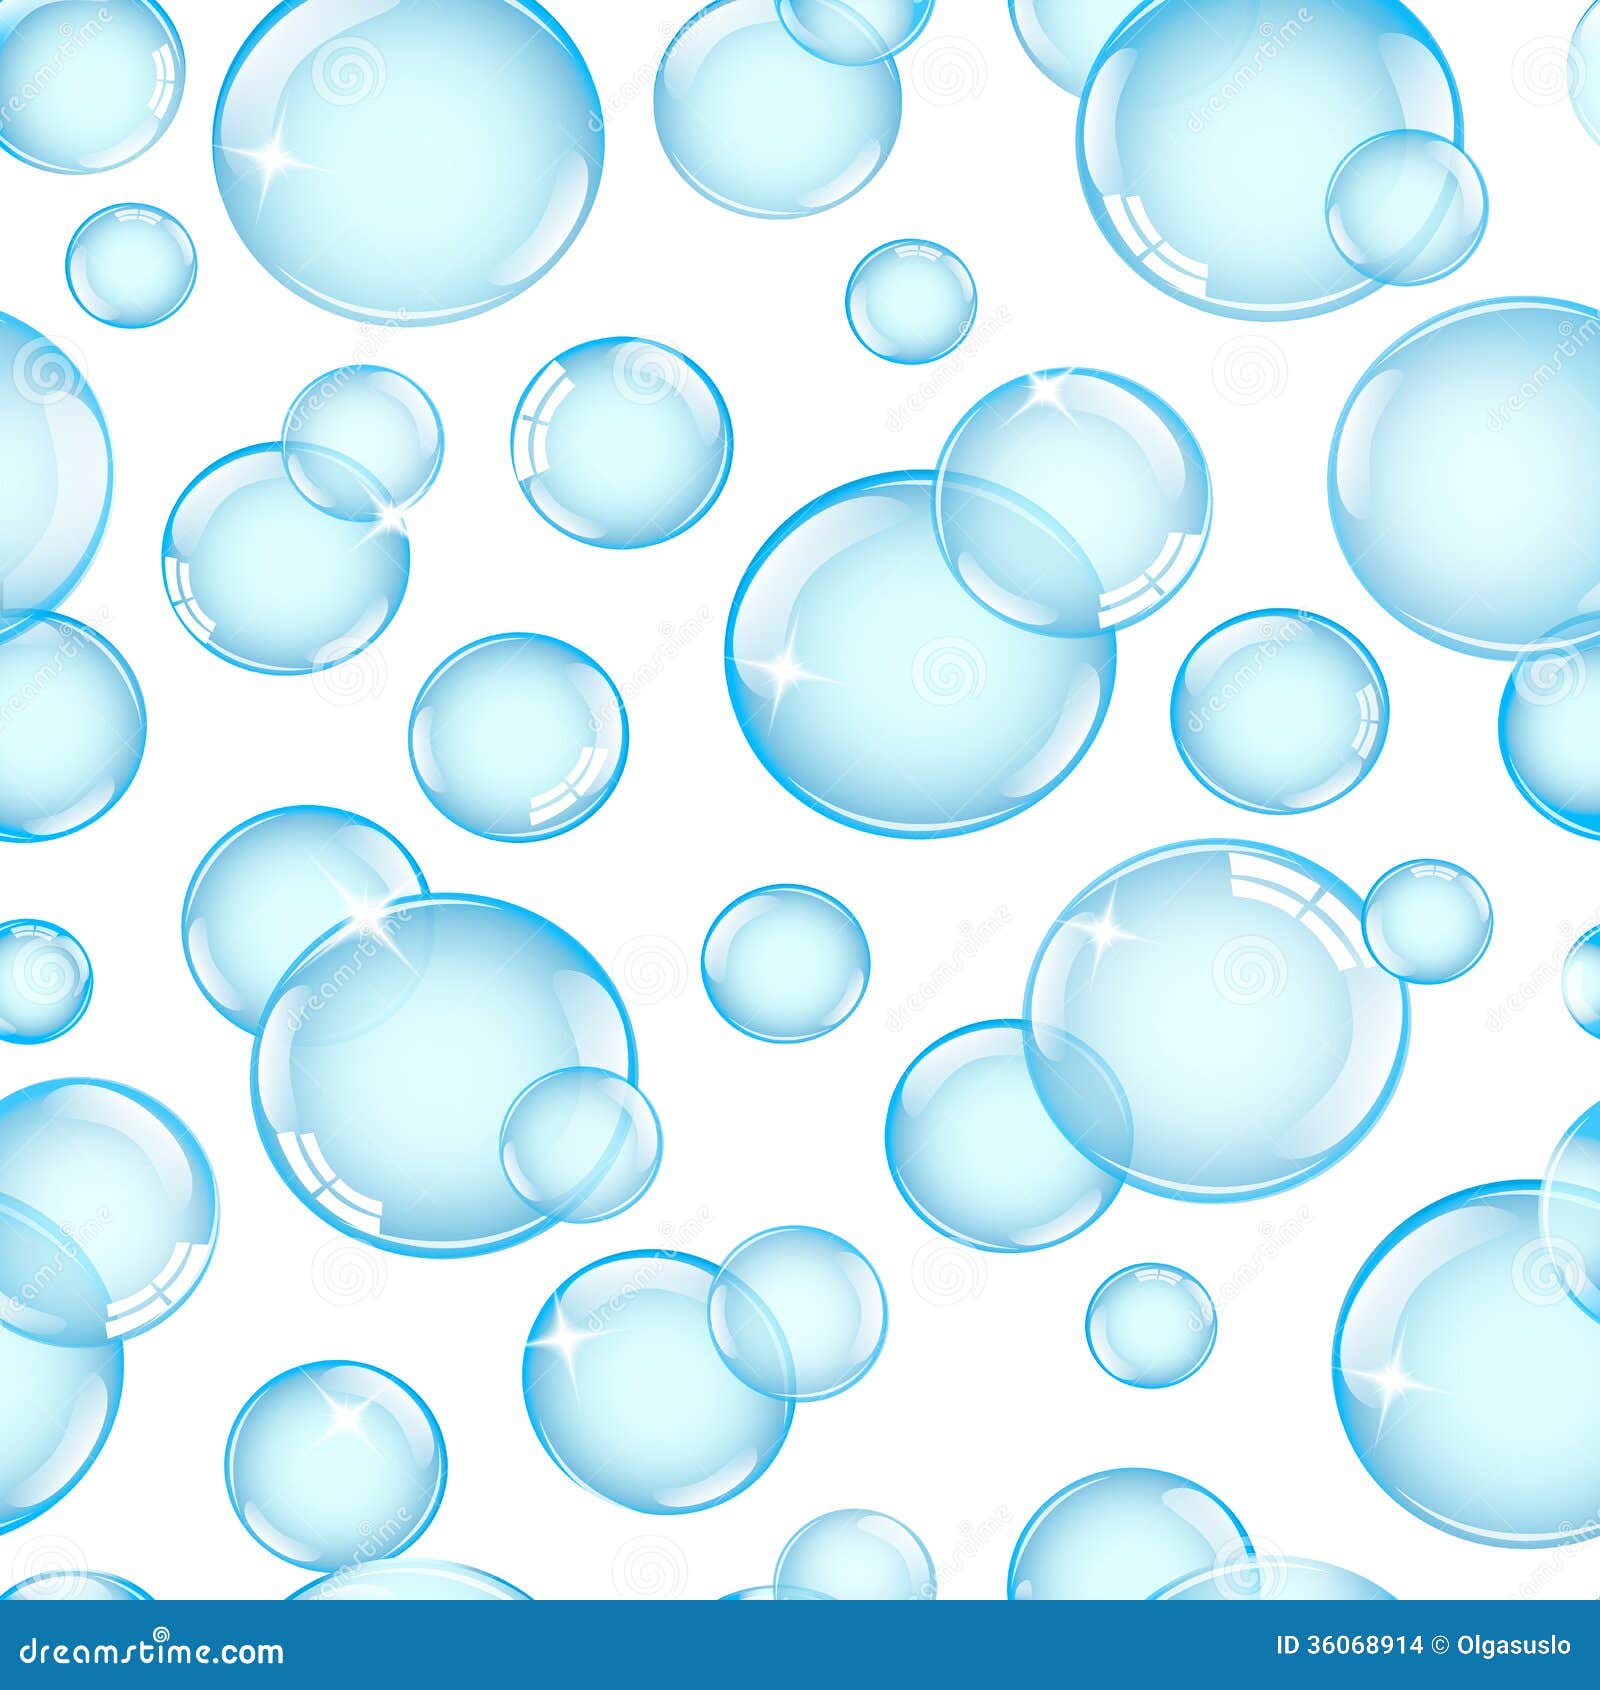 Seamless Background With Bubbles Stock Illustration - Illustration of